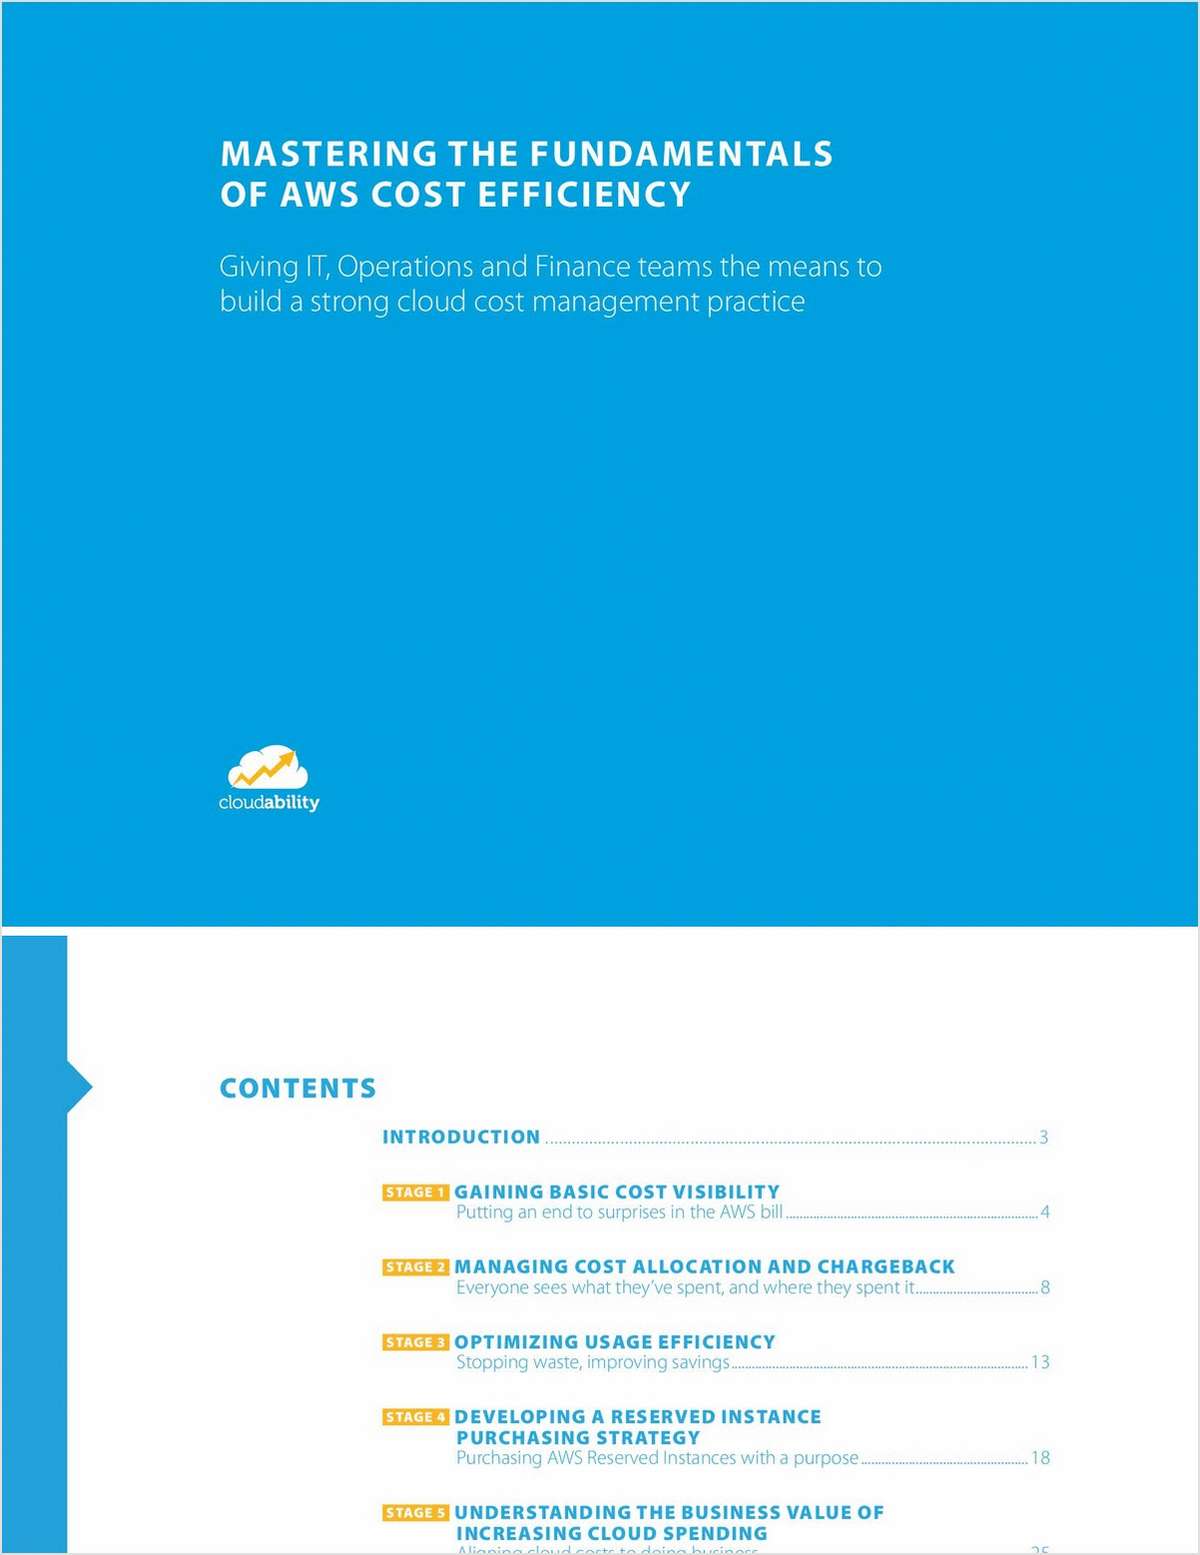 Mastering the Fundamentals of AWS Cost Efficiency